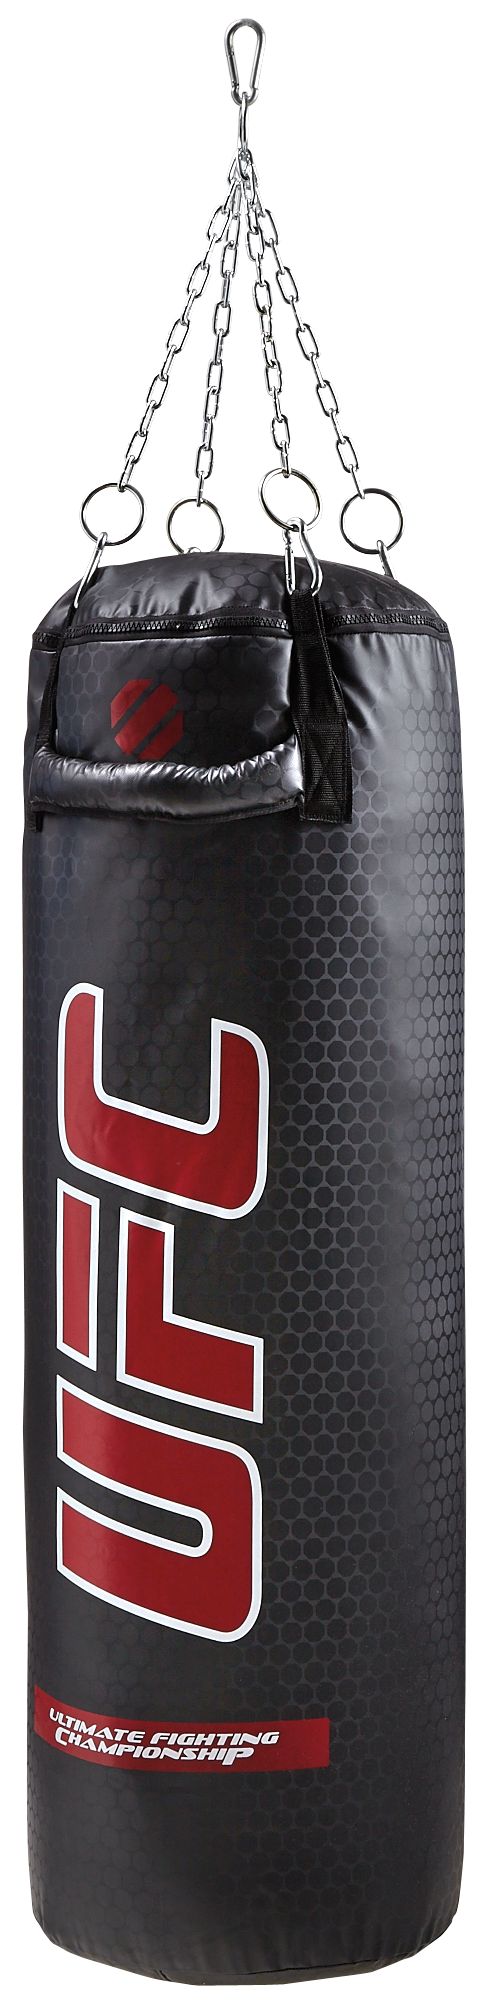 Punching Bags, Speed Bags & Stands | DICK'S Sporting Goods